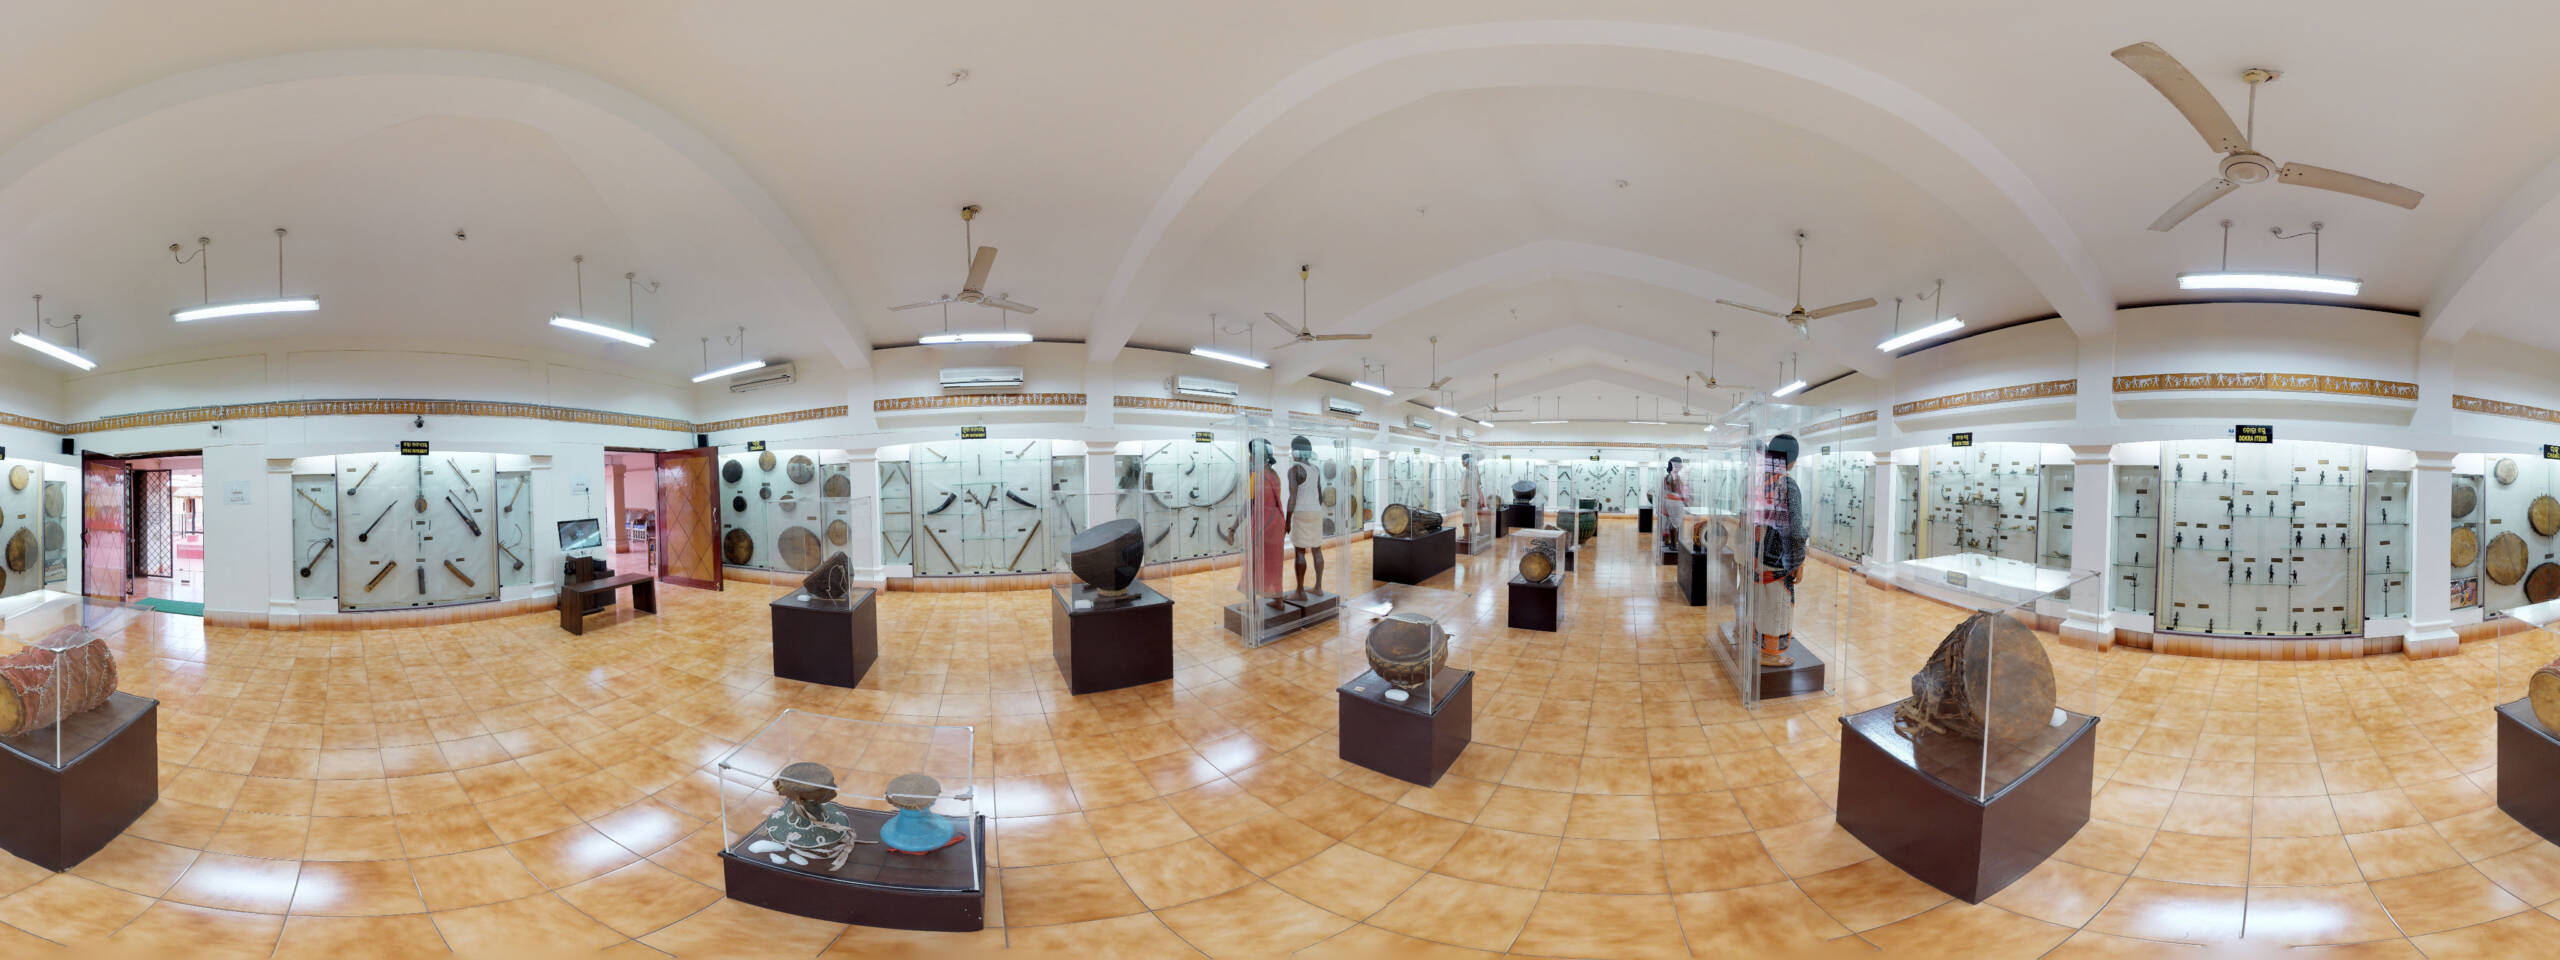 360 degree view of Musical Instruments gallery of Odisha State Tribal Museum